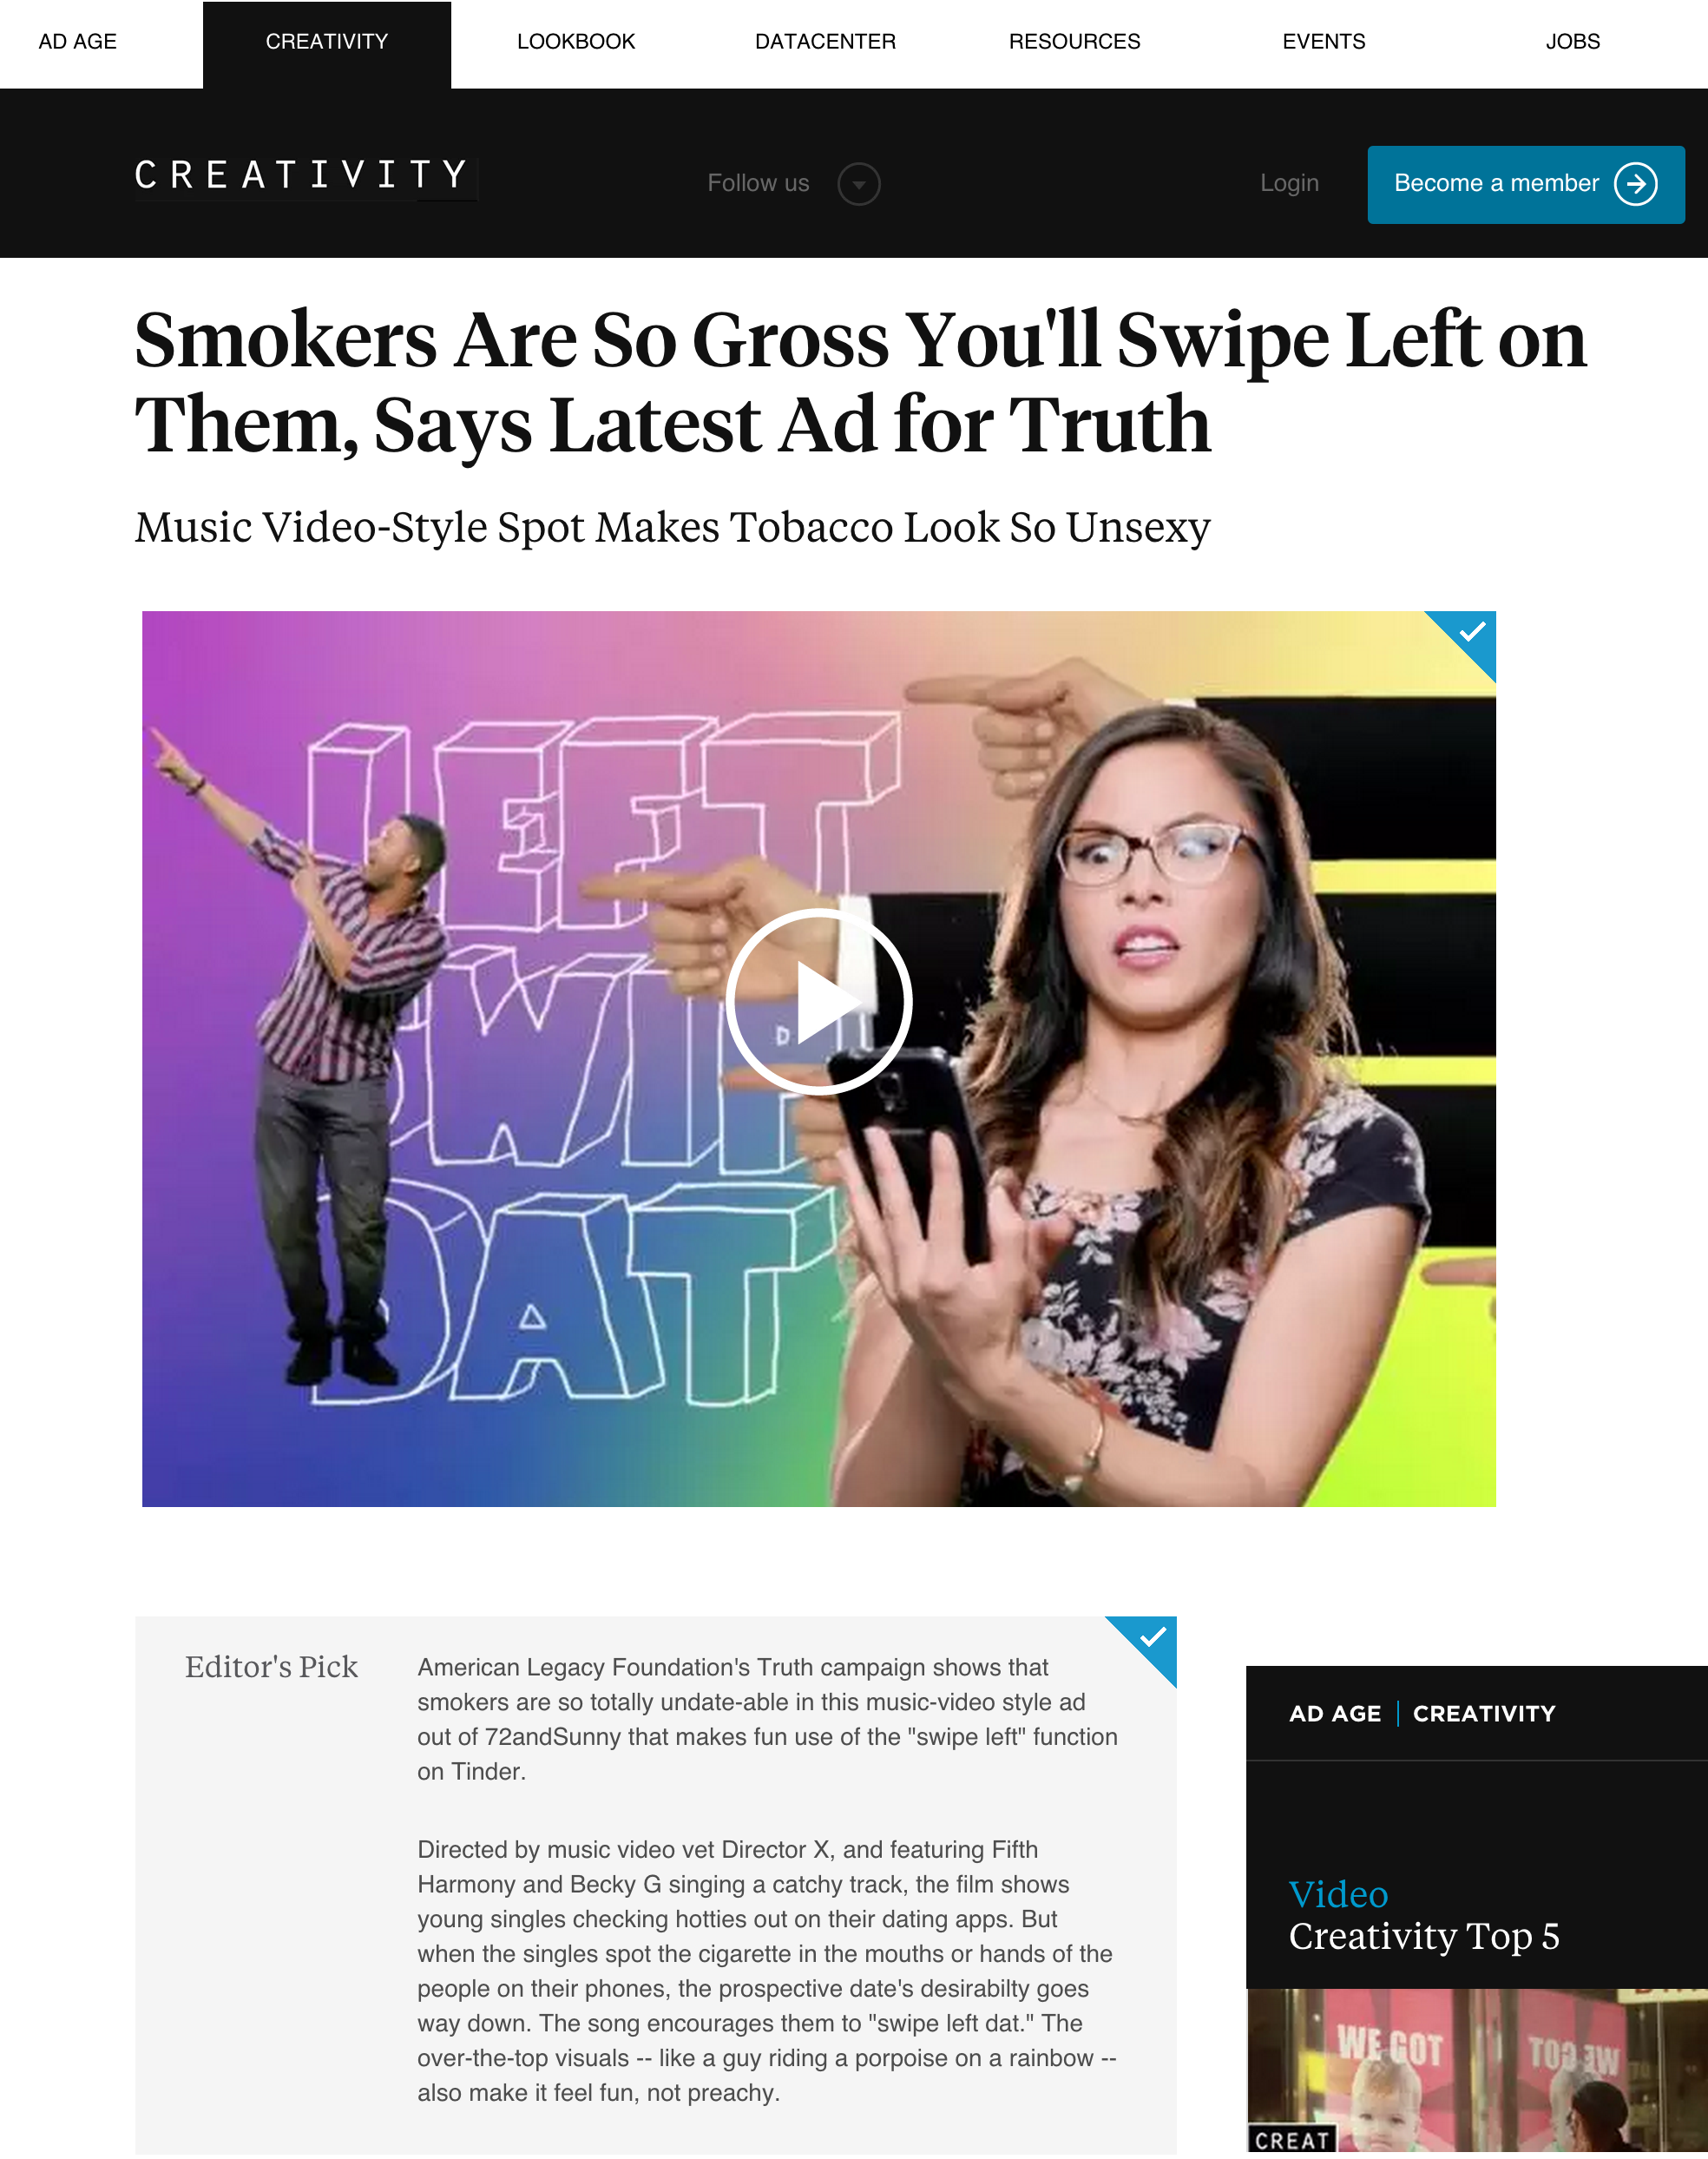 Smokers Are So Gross You'll Swipe Left on Them, Says Latest Ad for Truth - Video - Creativity Online.png